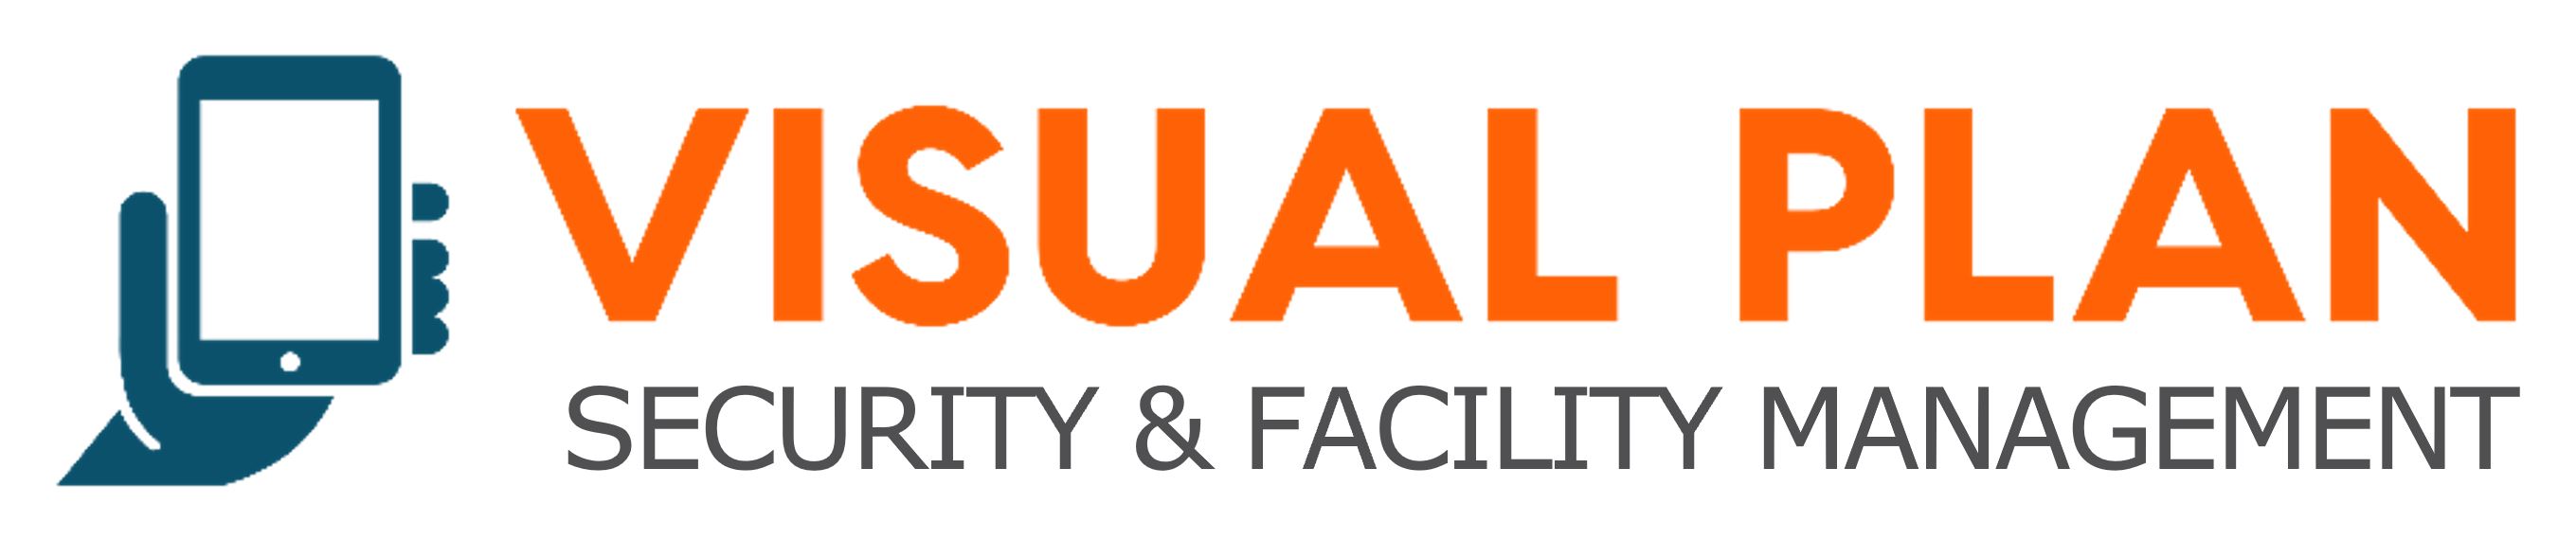 Visual Plan Inc. Facility Management and Security Software's Logo